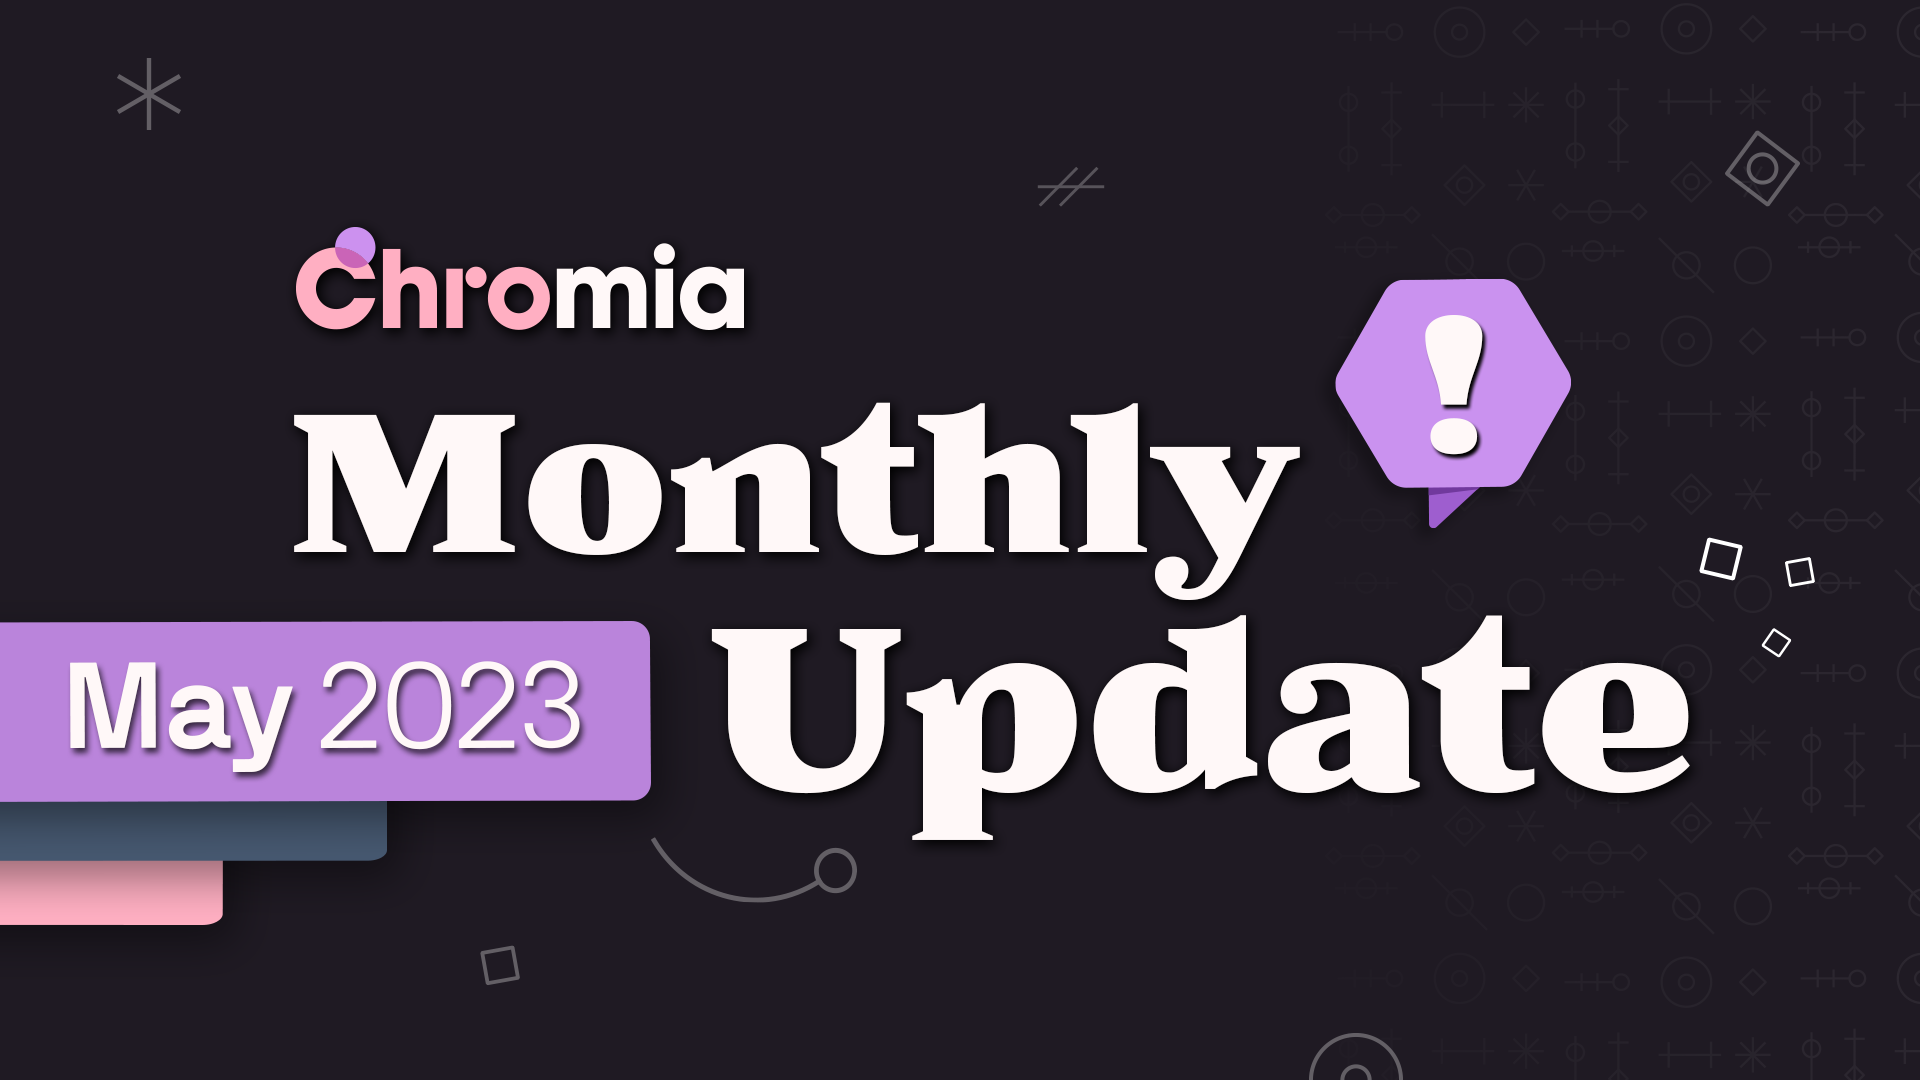 Chromia Monthly Update: May 2023